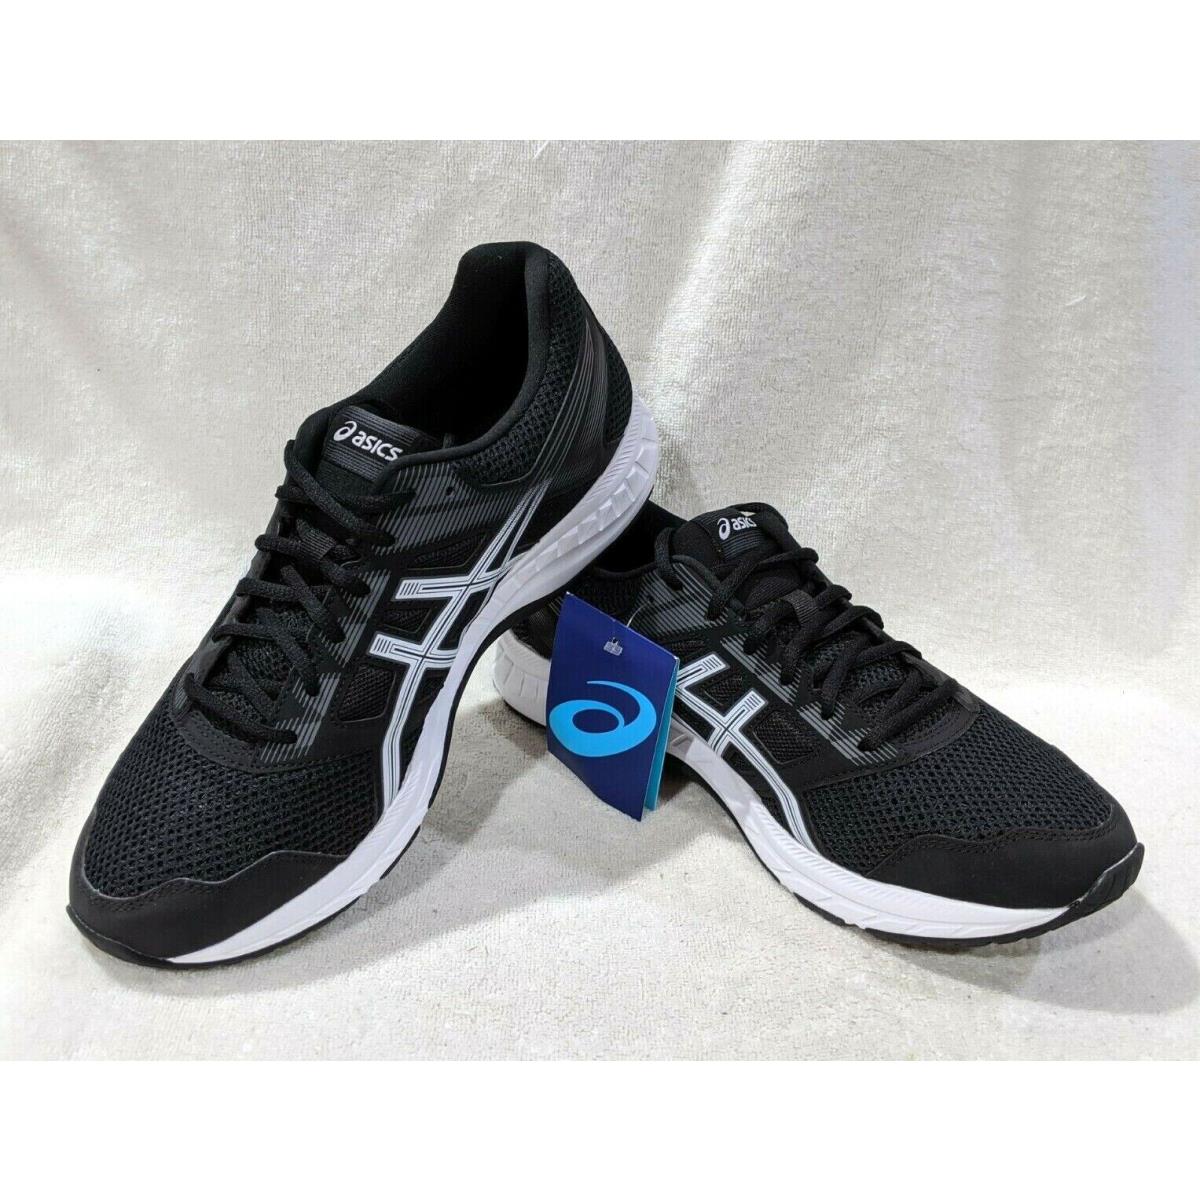 Asics Men`s Gel-contend 5 Black/white Running Shoes - Size 11.5 1011A256-001